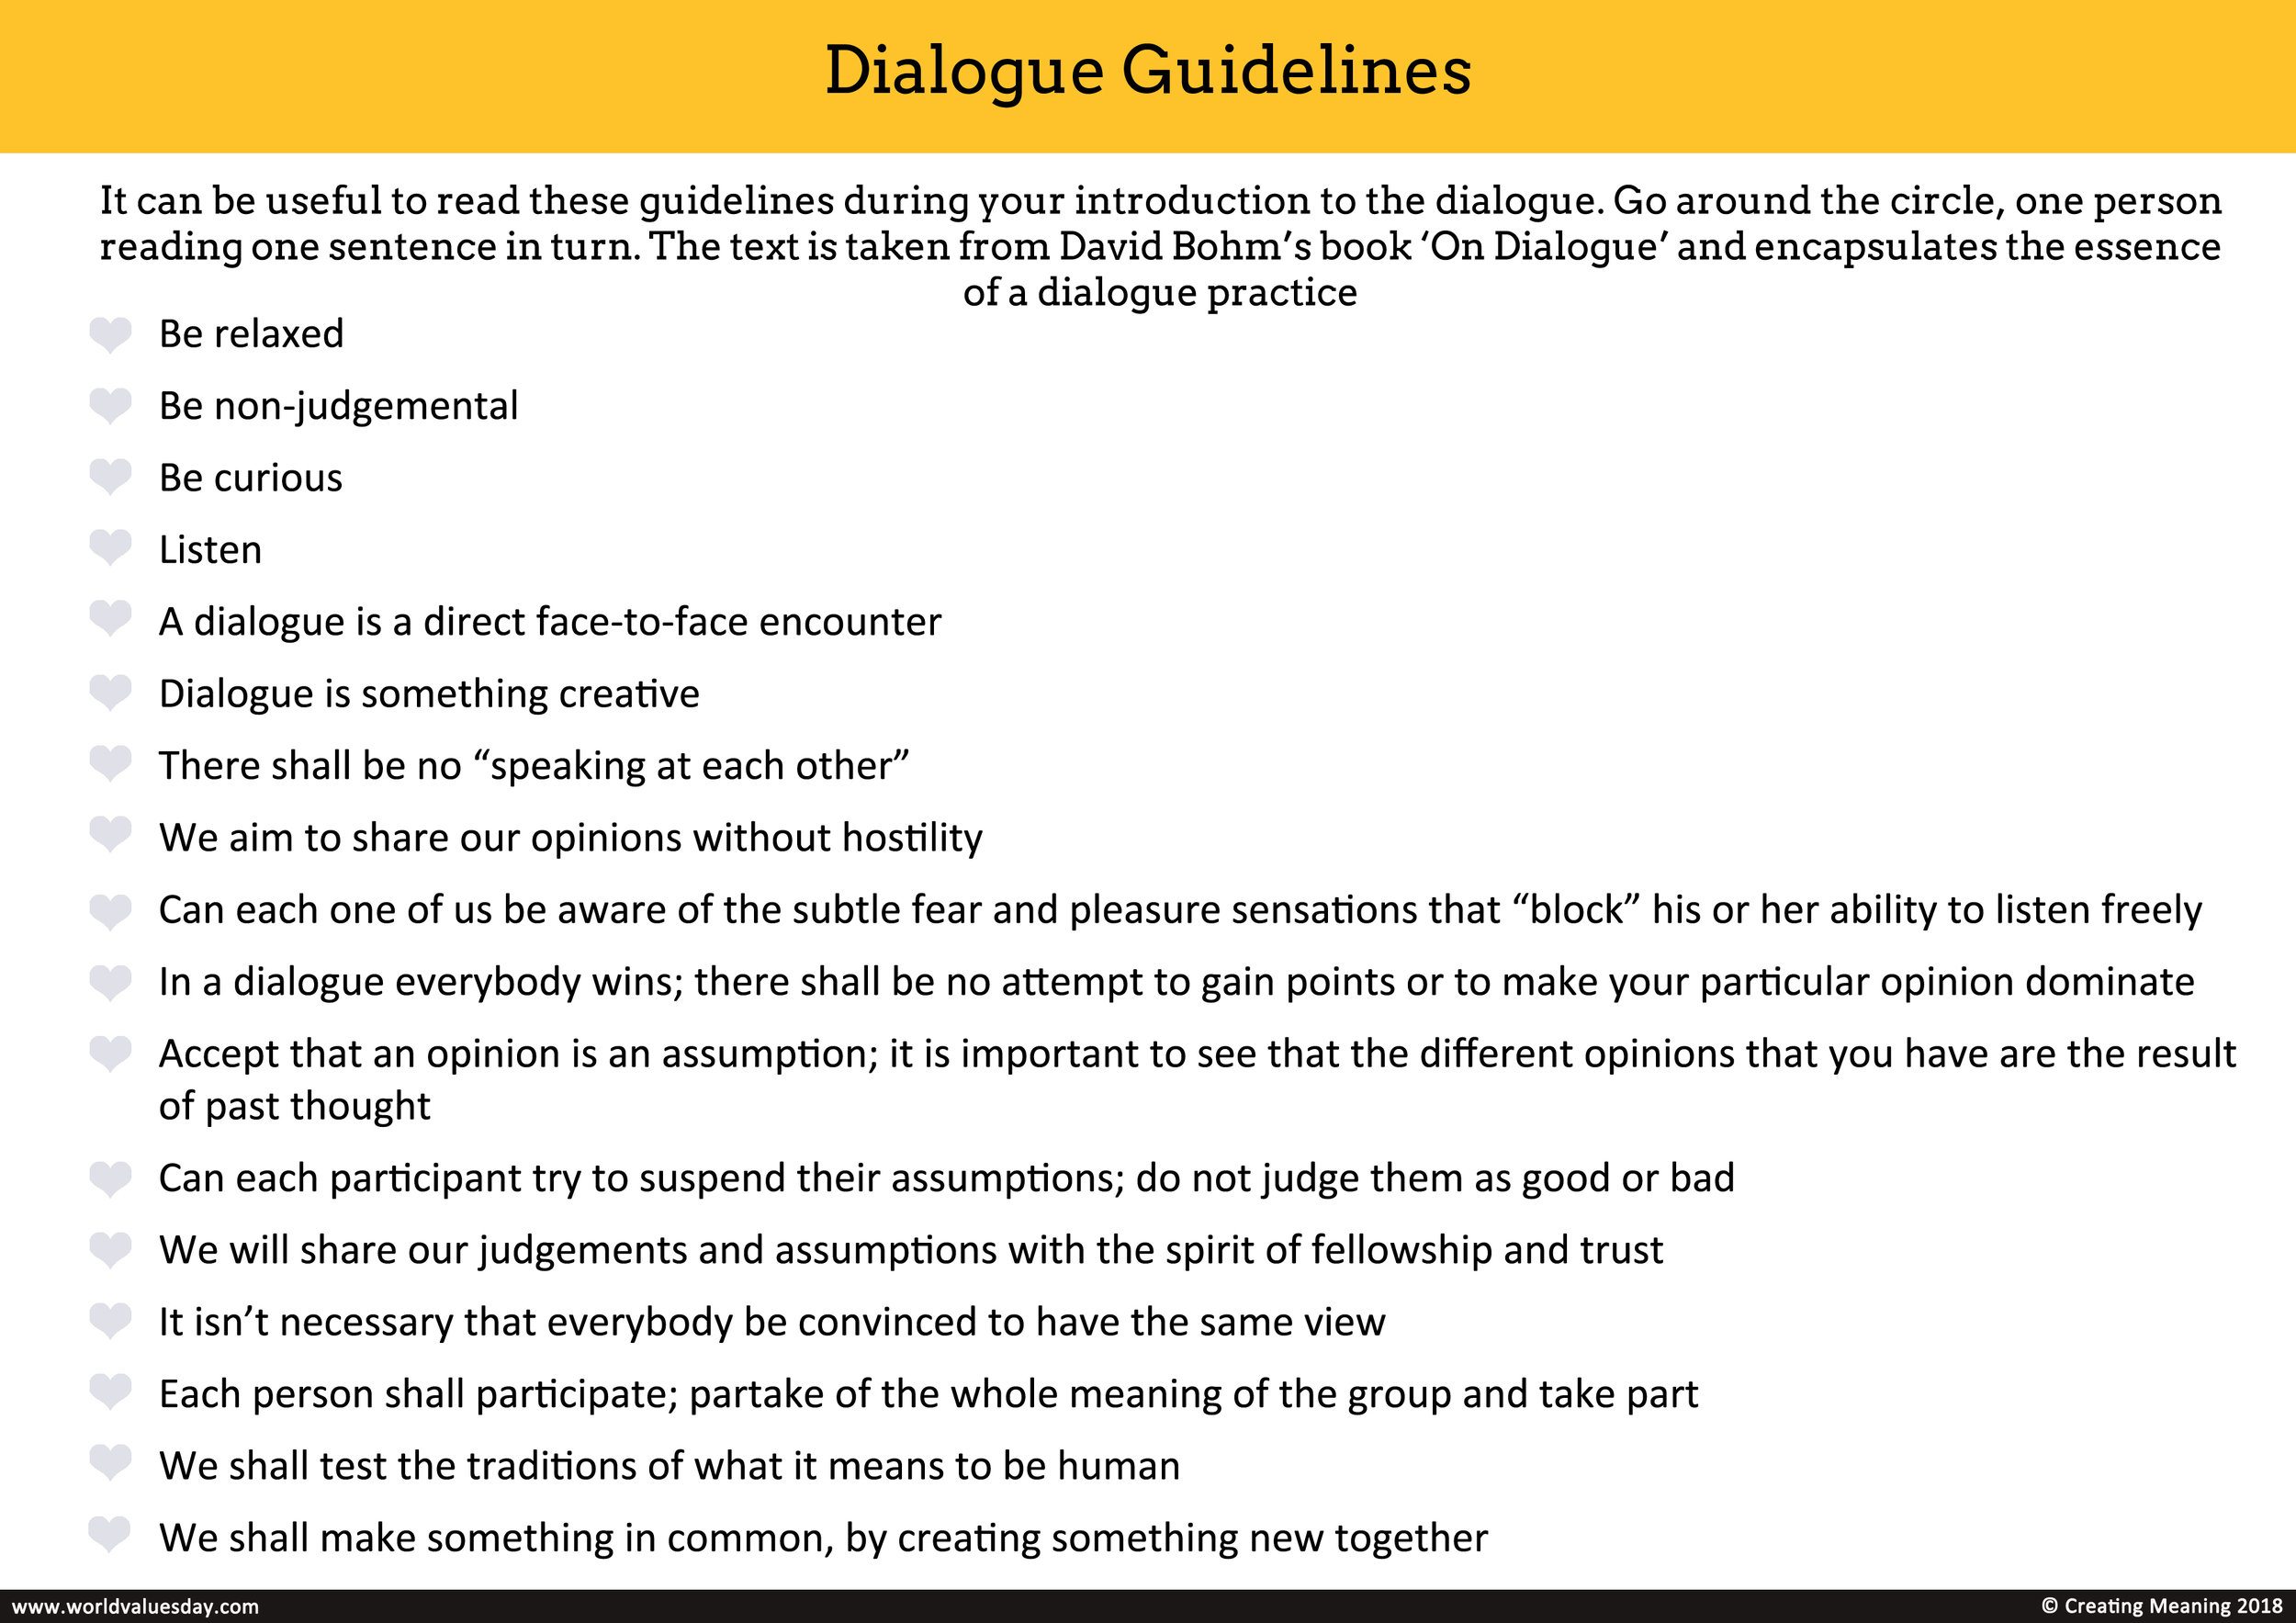 10 dialogue guidelines.jpg